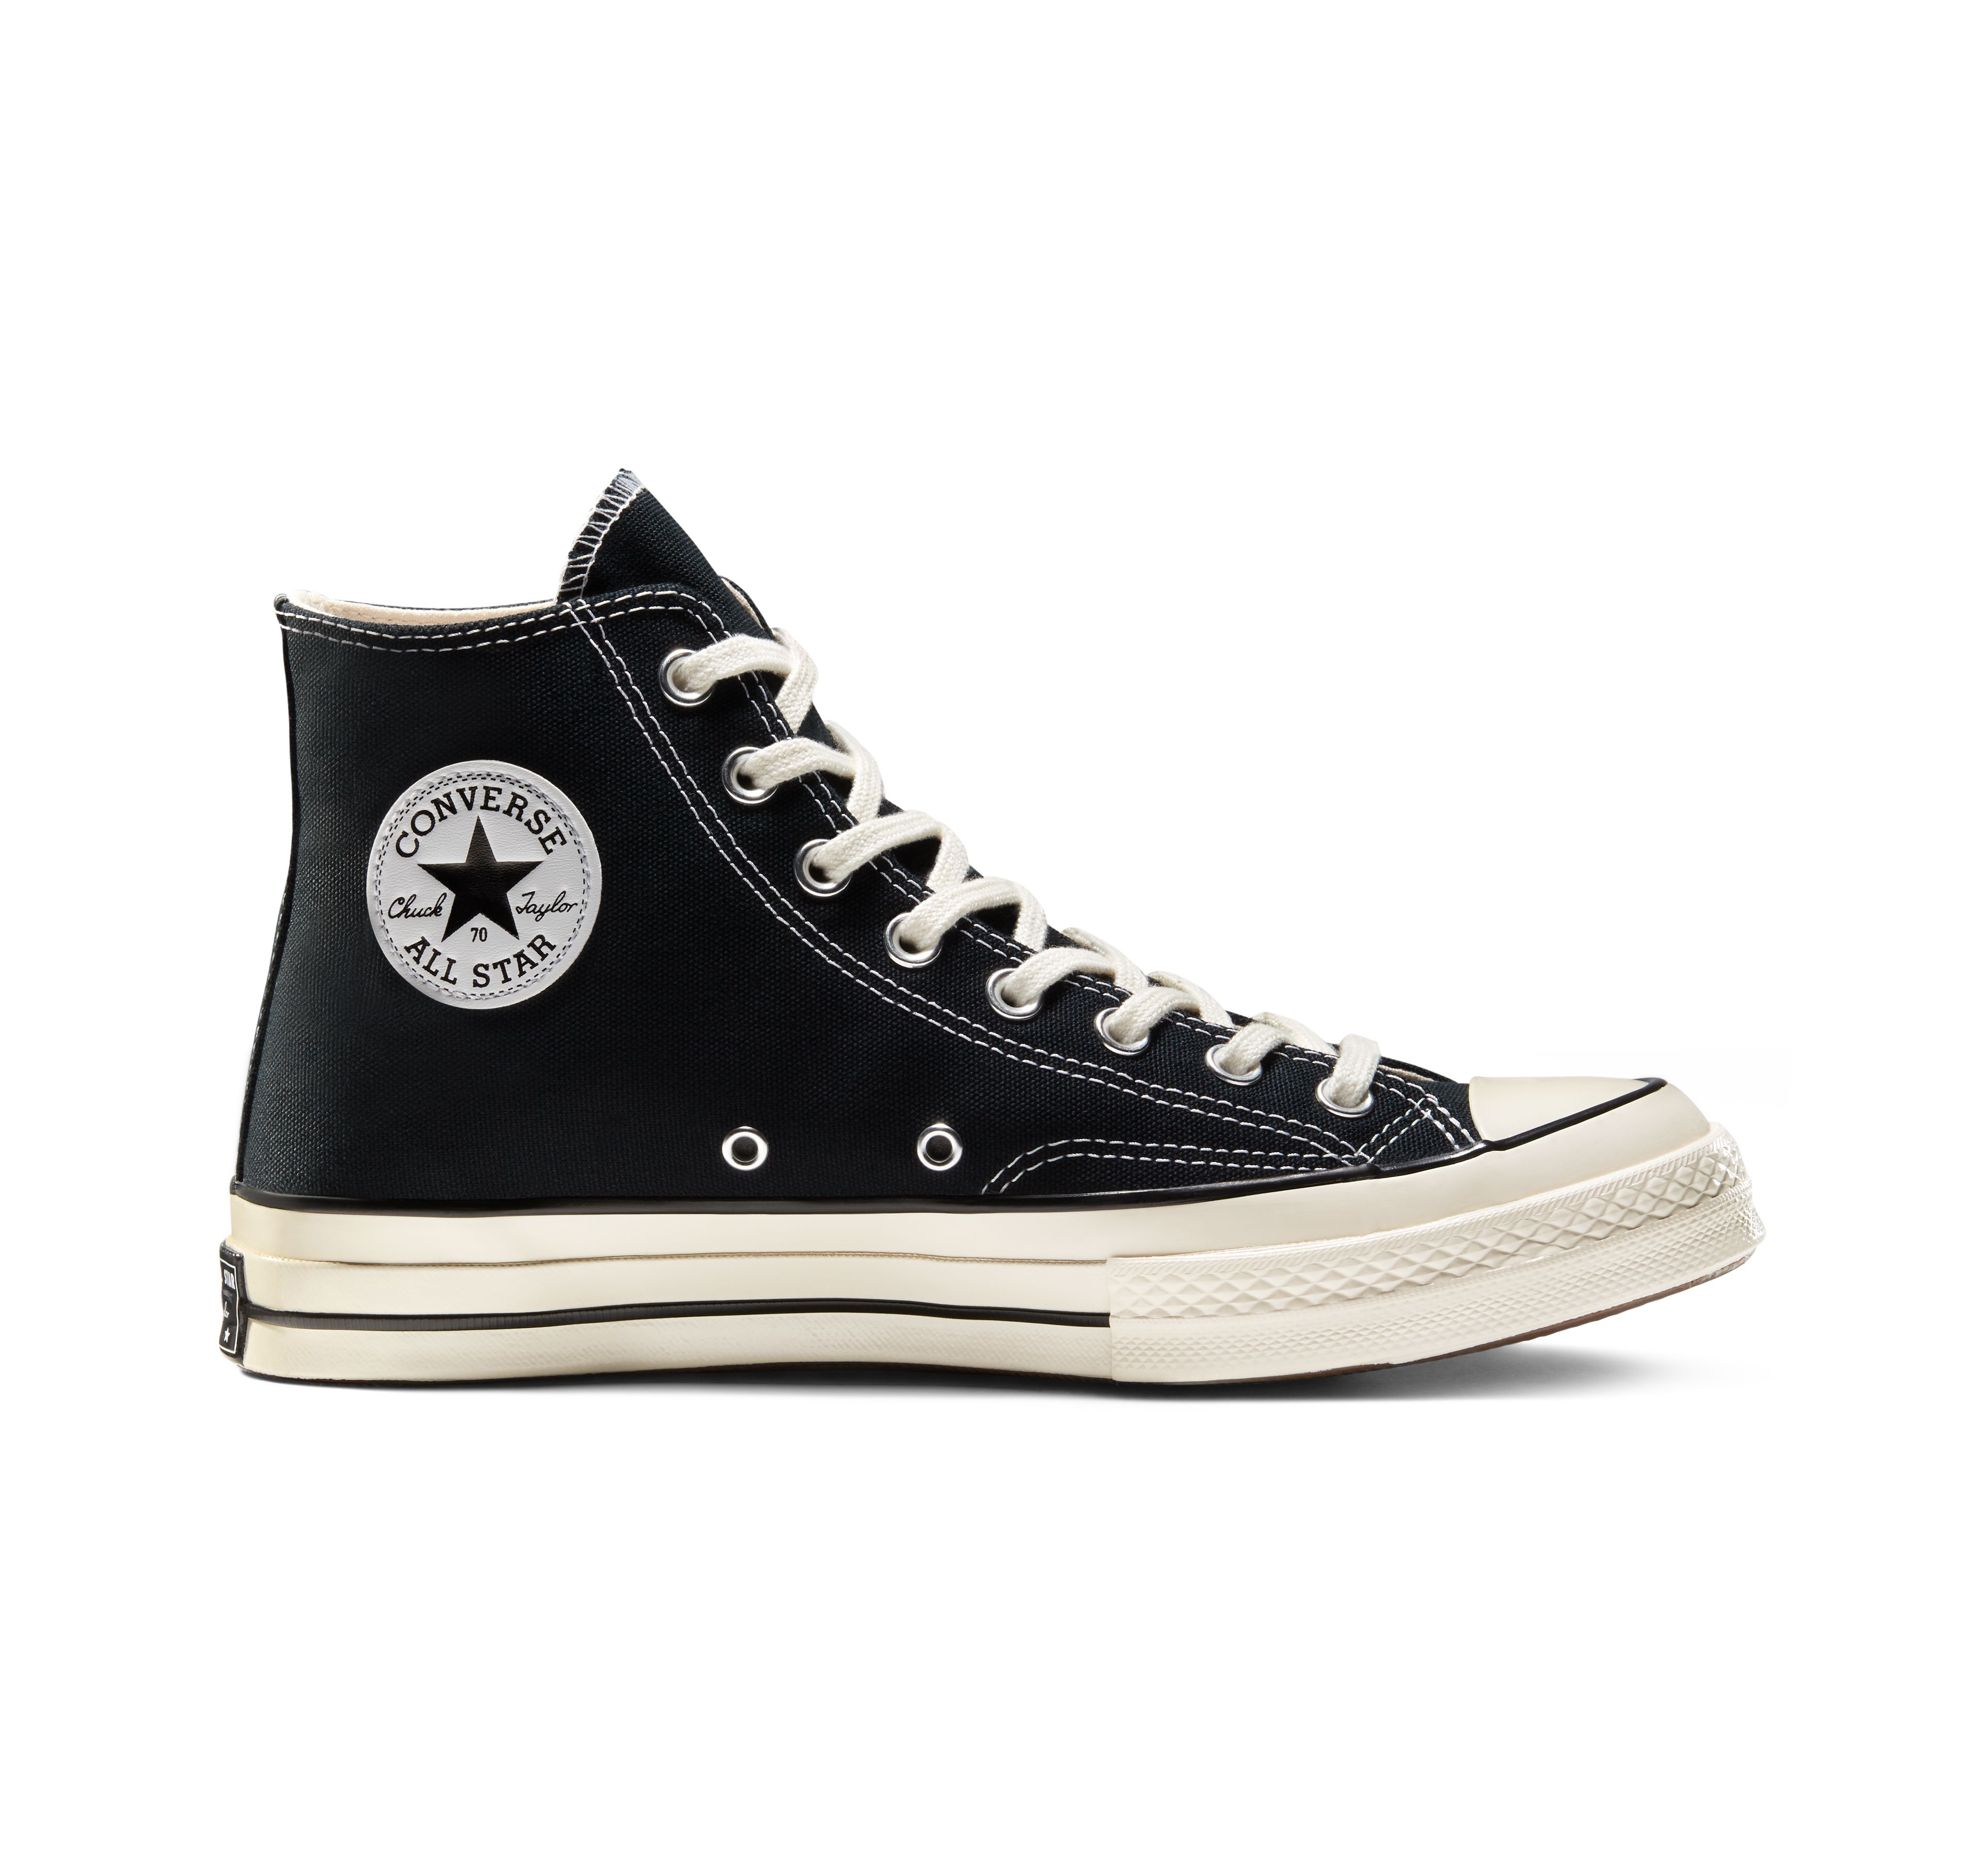 converse basketball shoes philippines price list